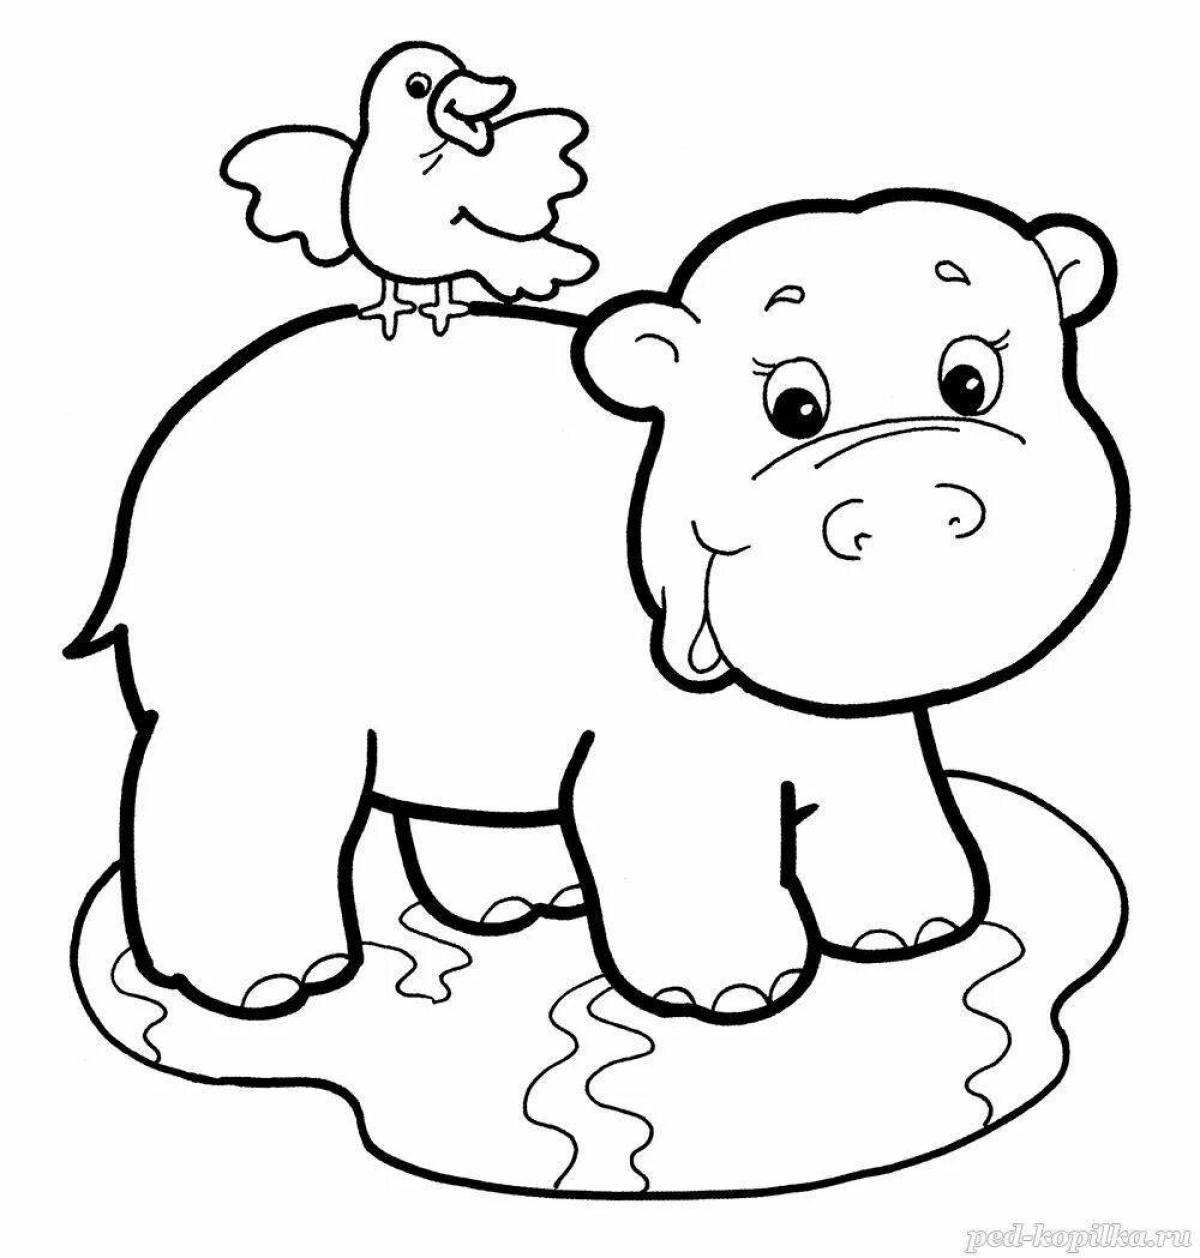 Adorable animal coloring book for kids 2-3 years old